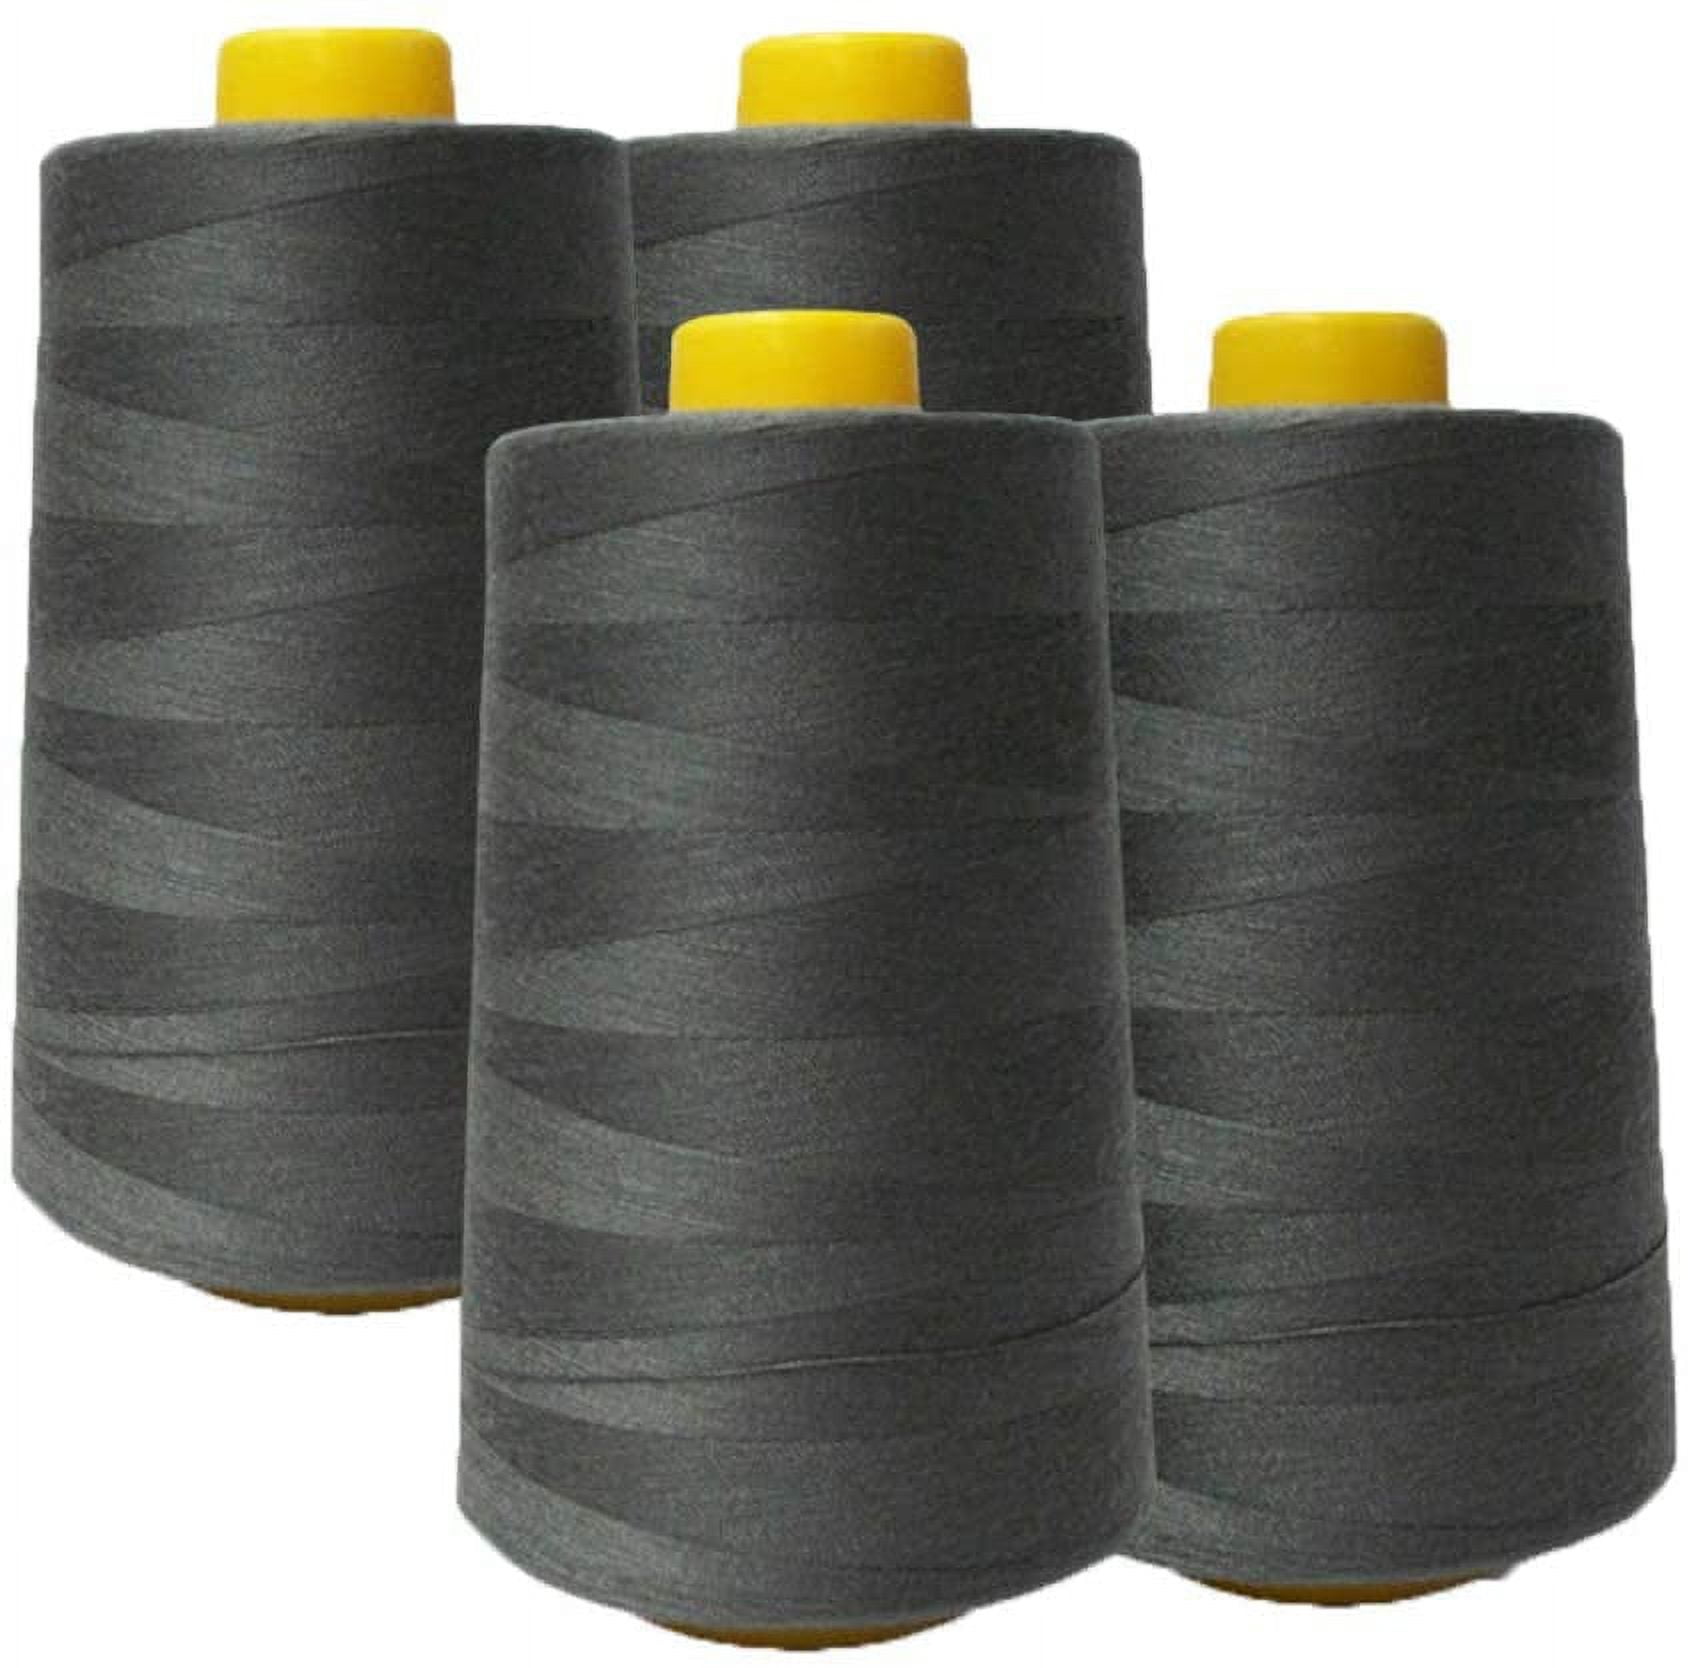 Polyester All-Purpose Sewing Thread 11 Cone Neutral Shades Set - 600m Cones  - Strong Lint Free Spun Polyester - 50S/3 Weight 